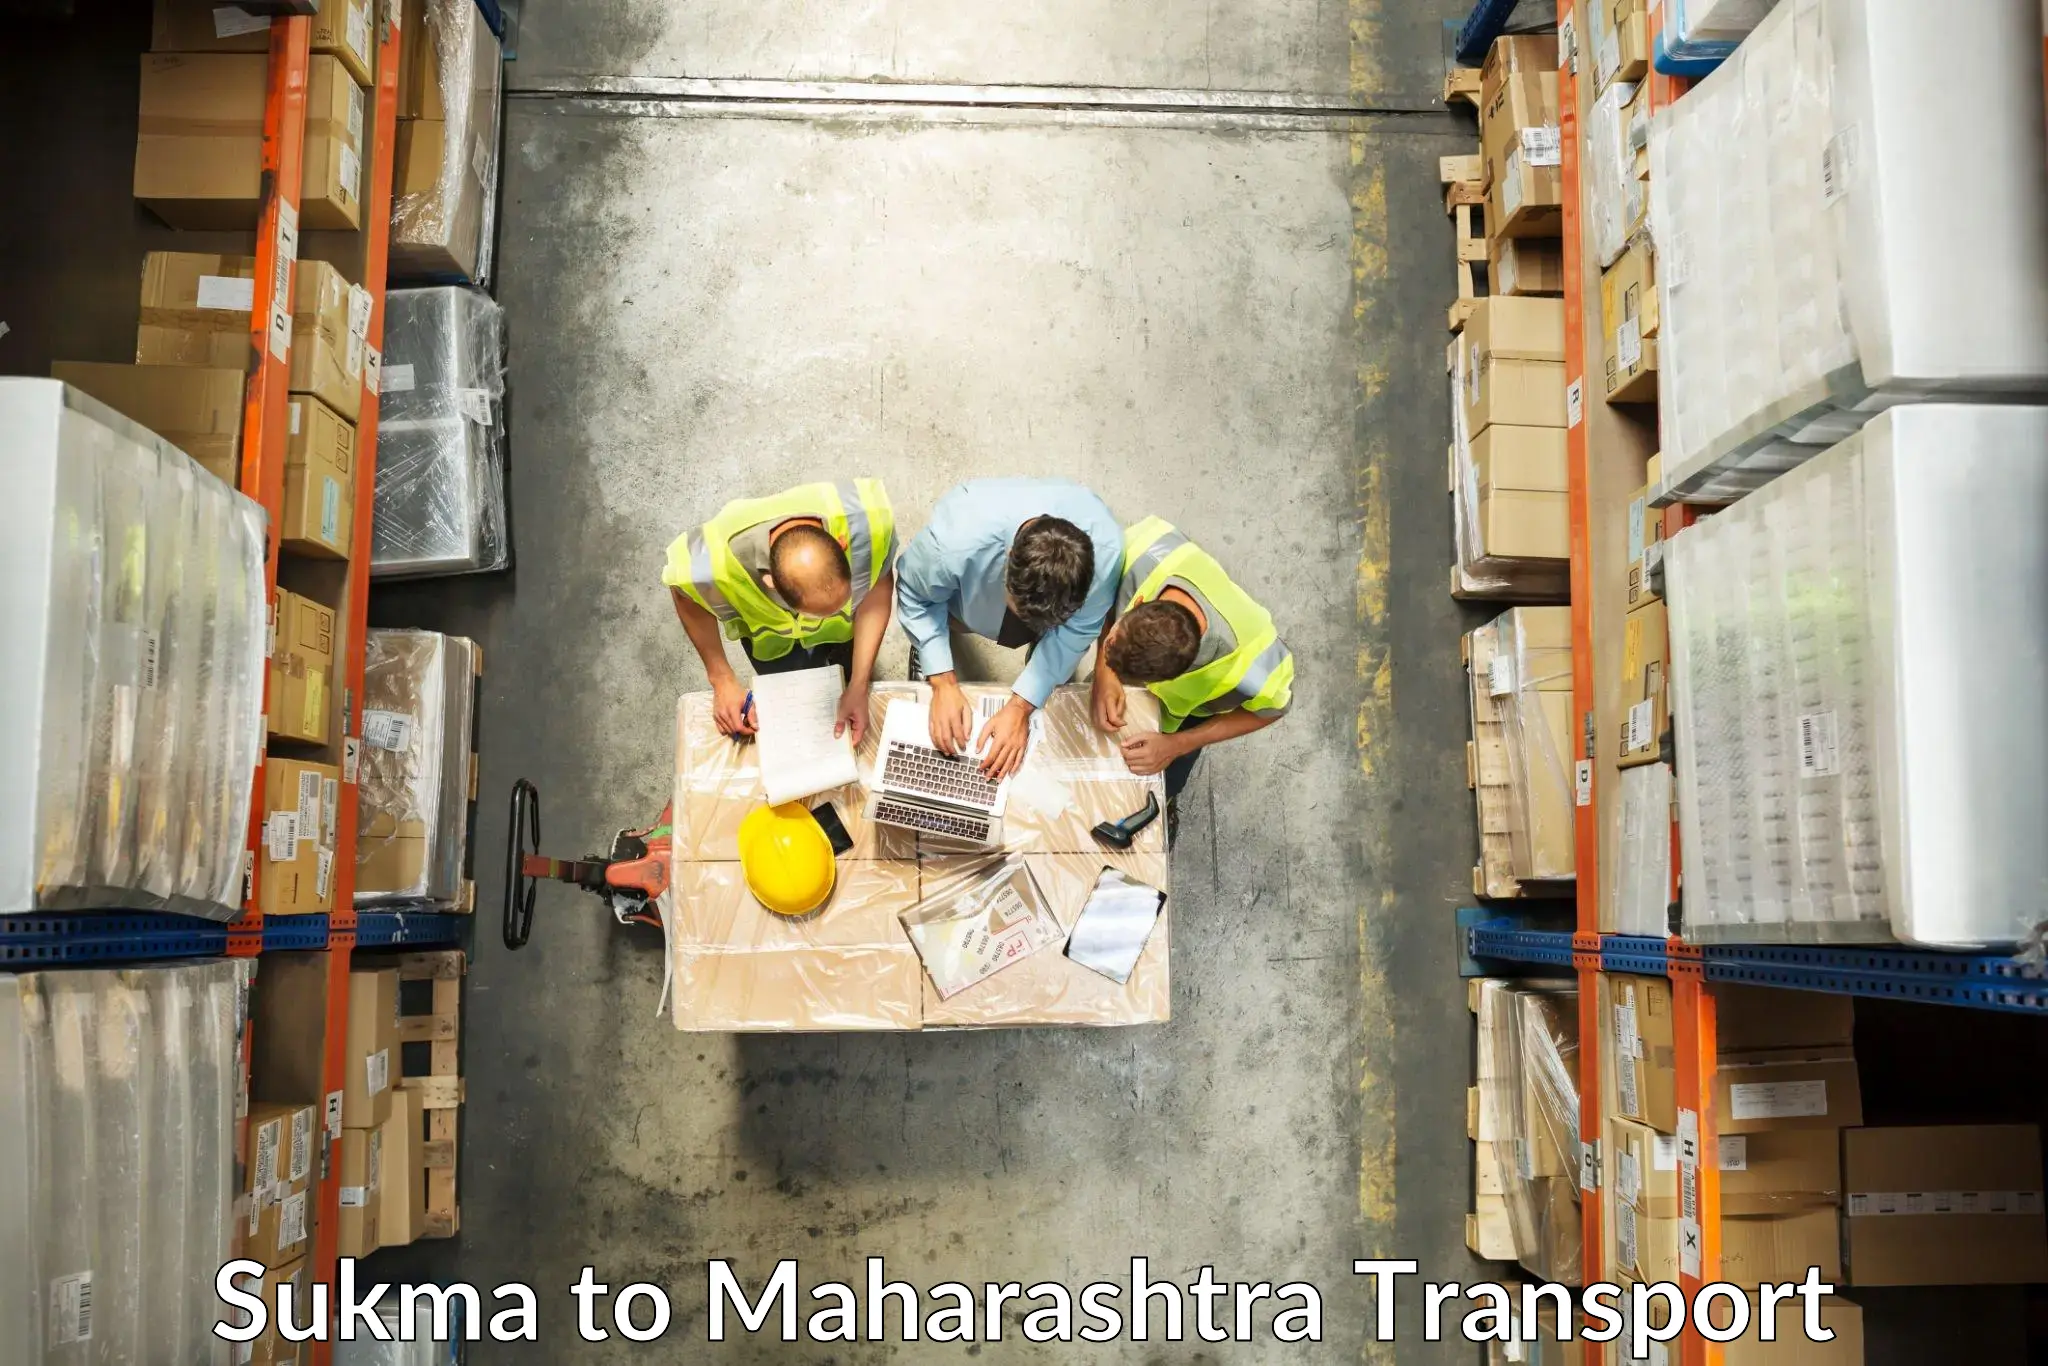 Transport bike from one state to another Sukma to Maharashtra